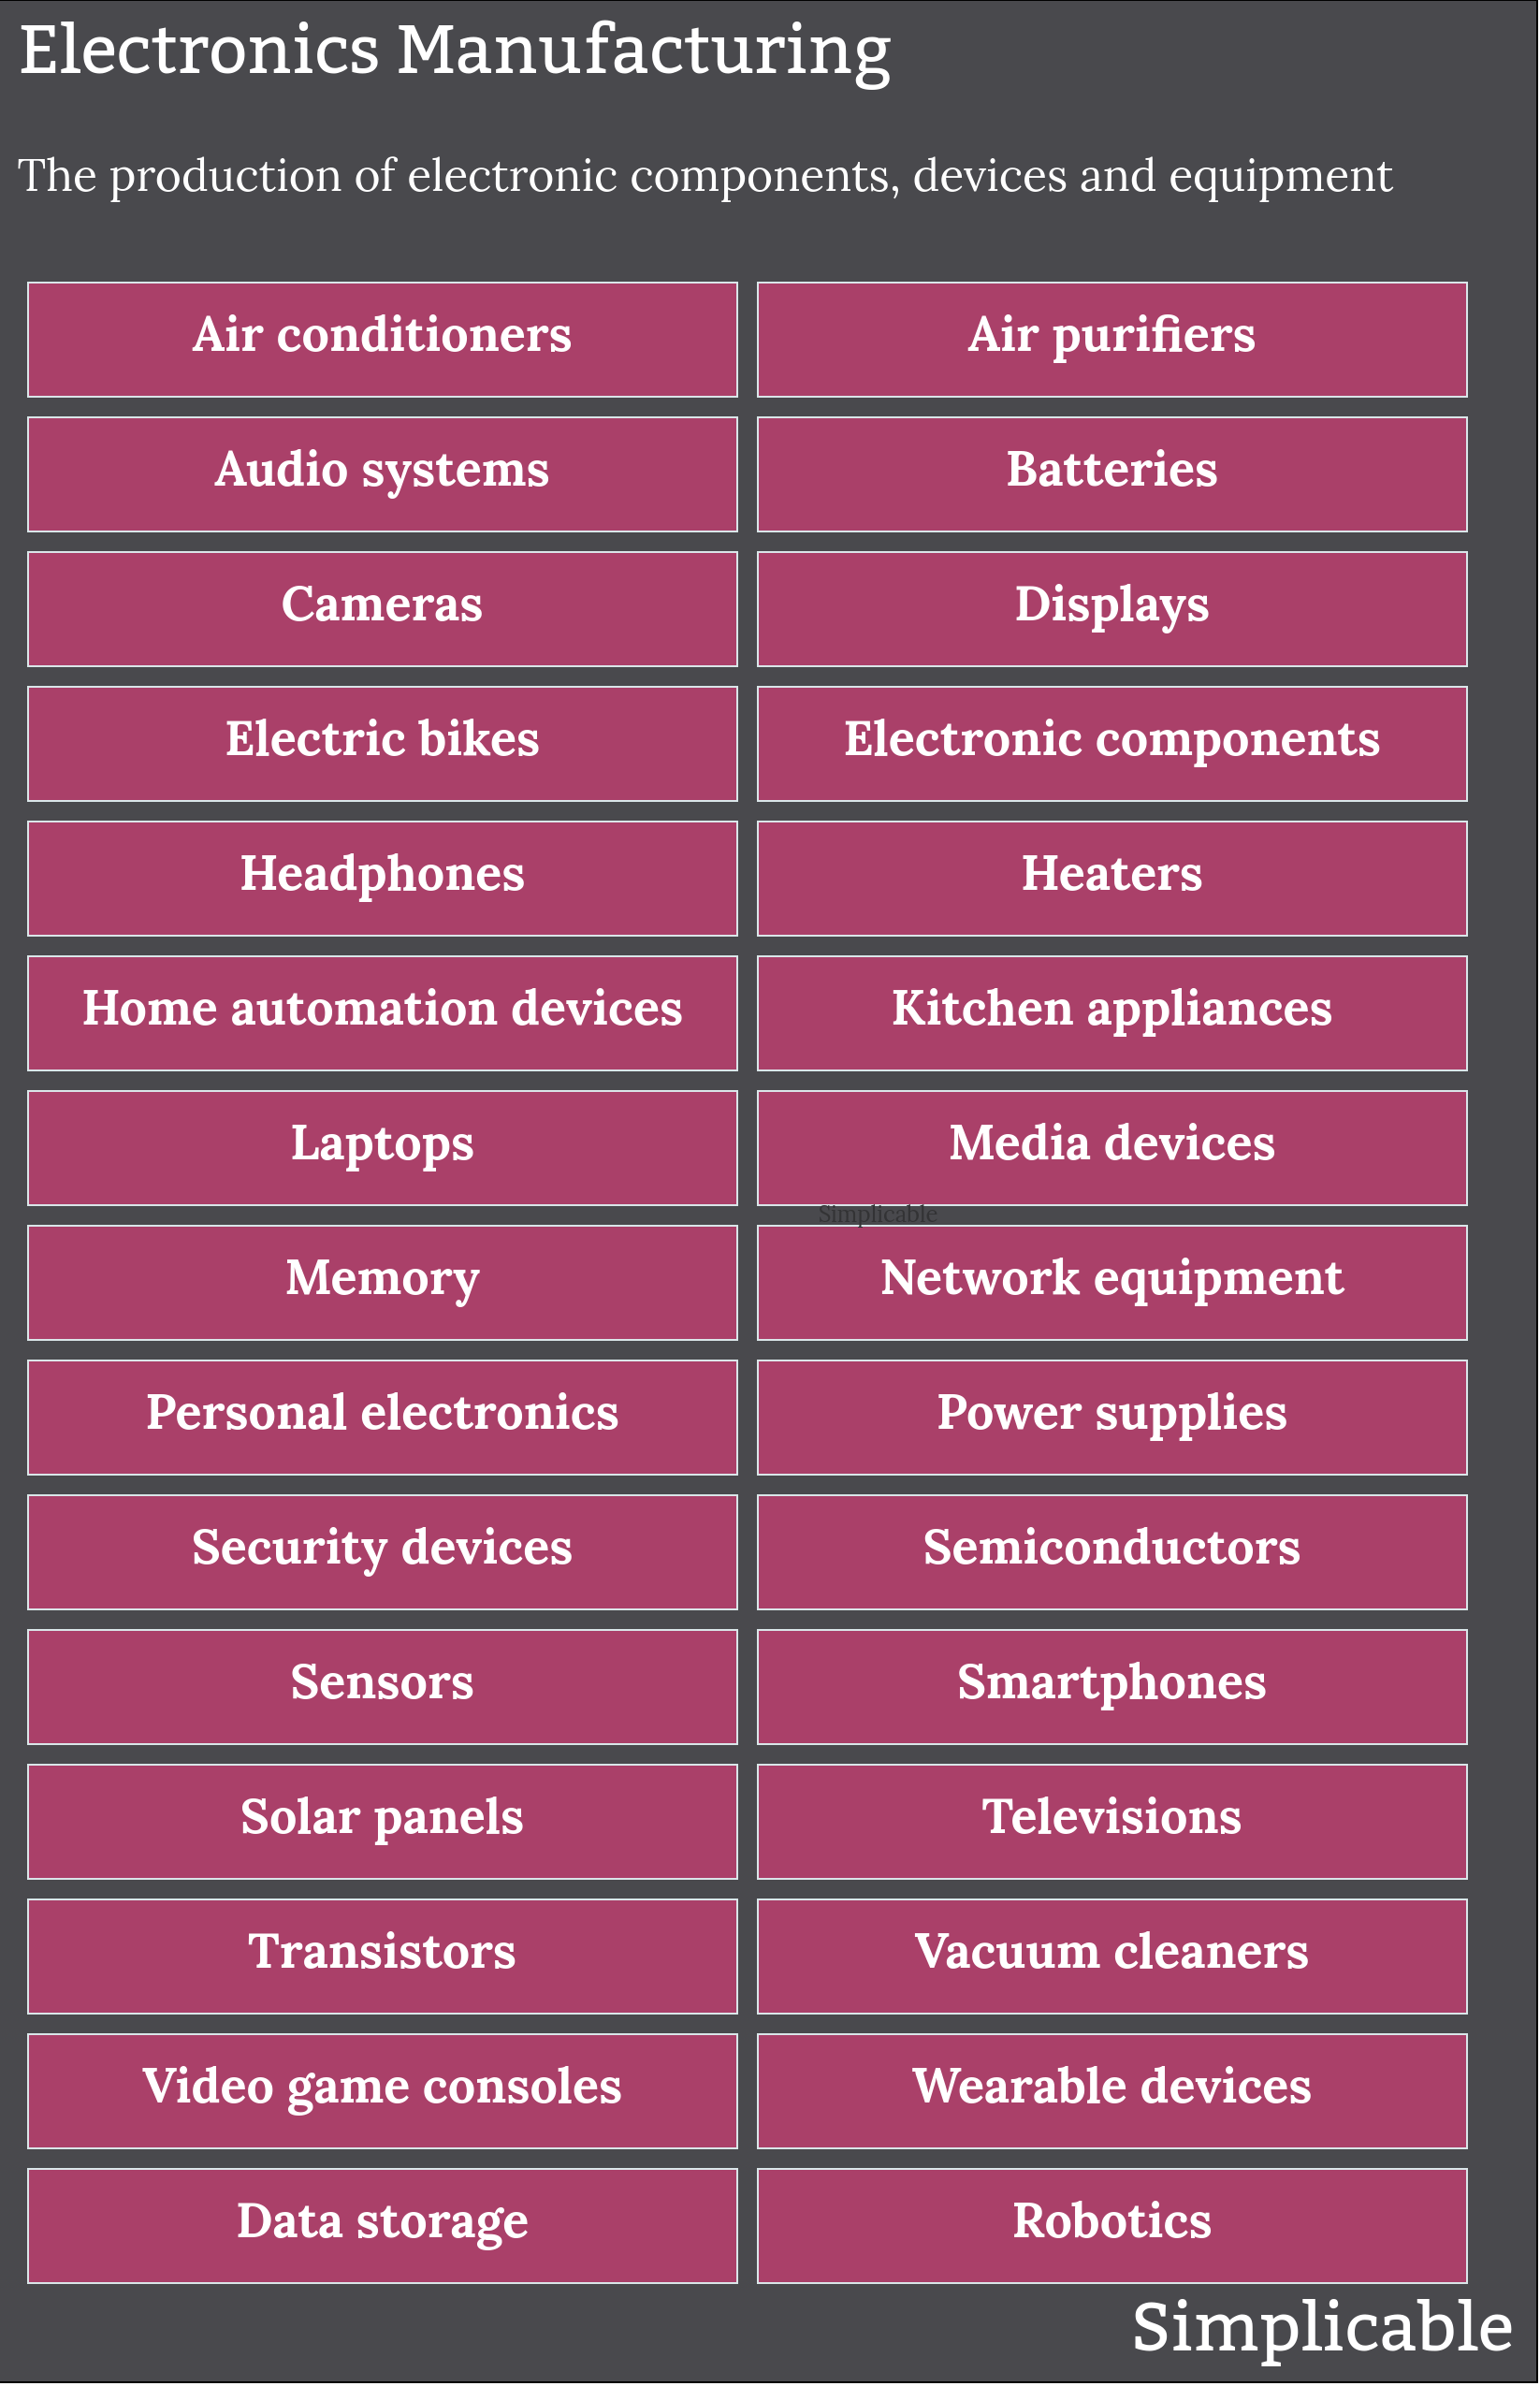 electronics manufacturing examples